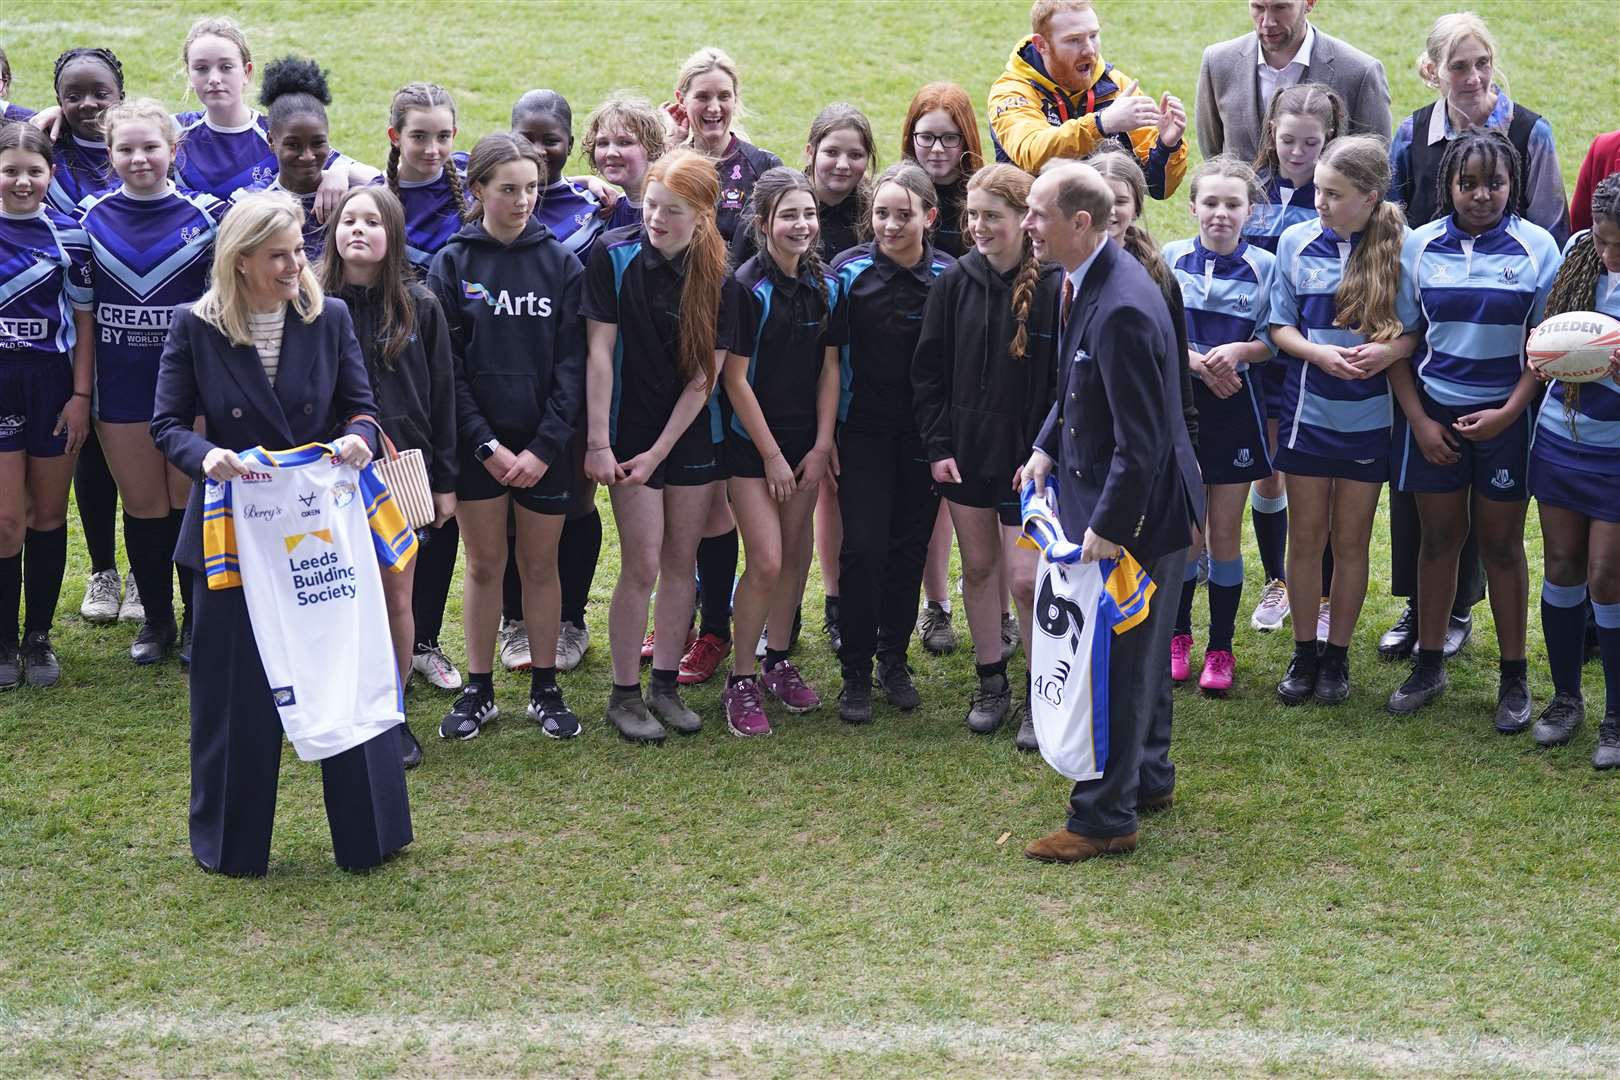 The Duke and Duchess of Edinburgh are presented with number 60 rugby shirts, ahead of his 60th birthday, during a visit to Headingley Stadium in Leeds to watch rugby trials and take part in an awards ceremony (Danny Lawson/PA)